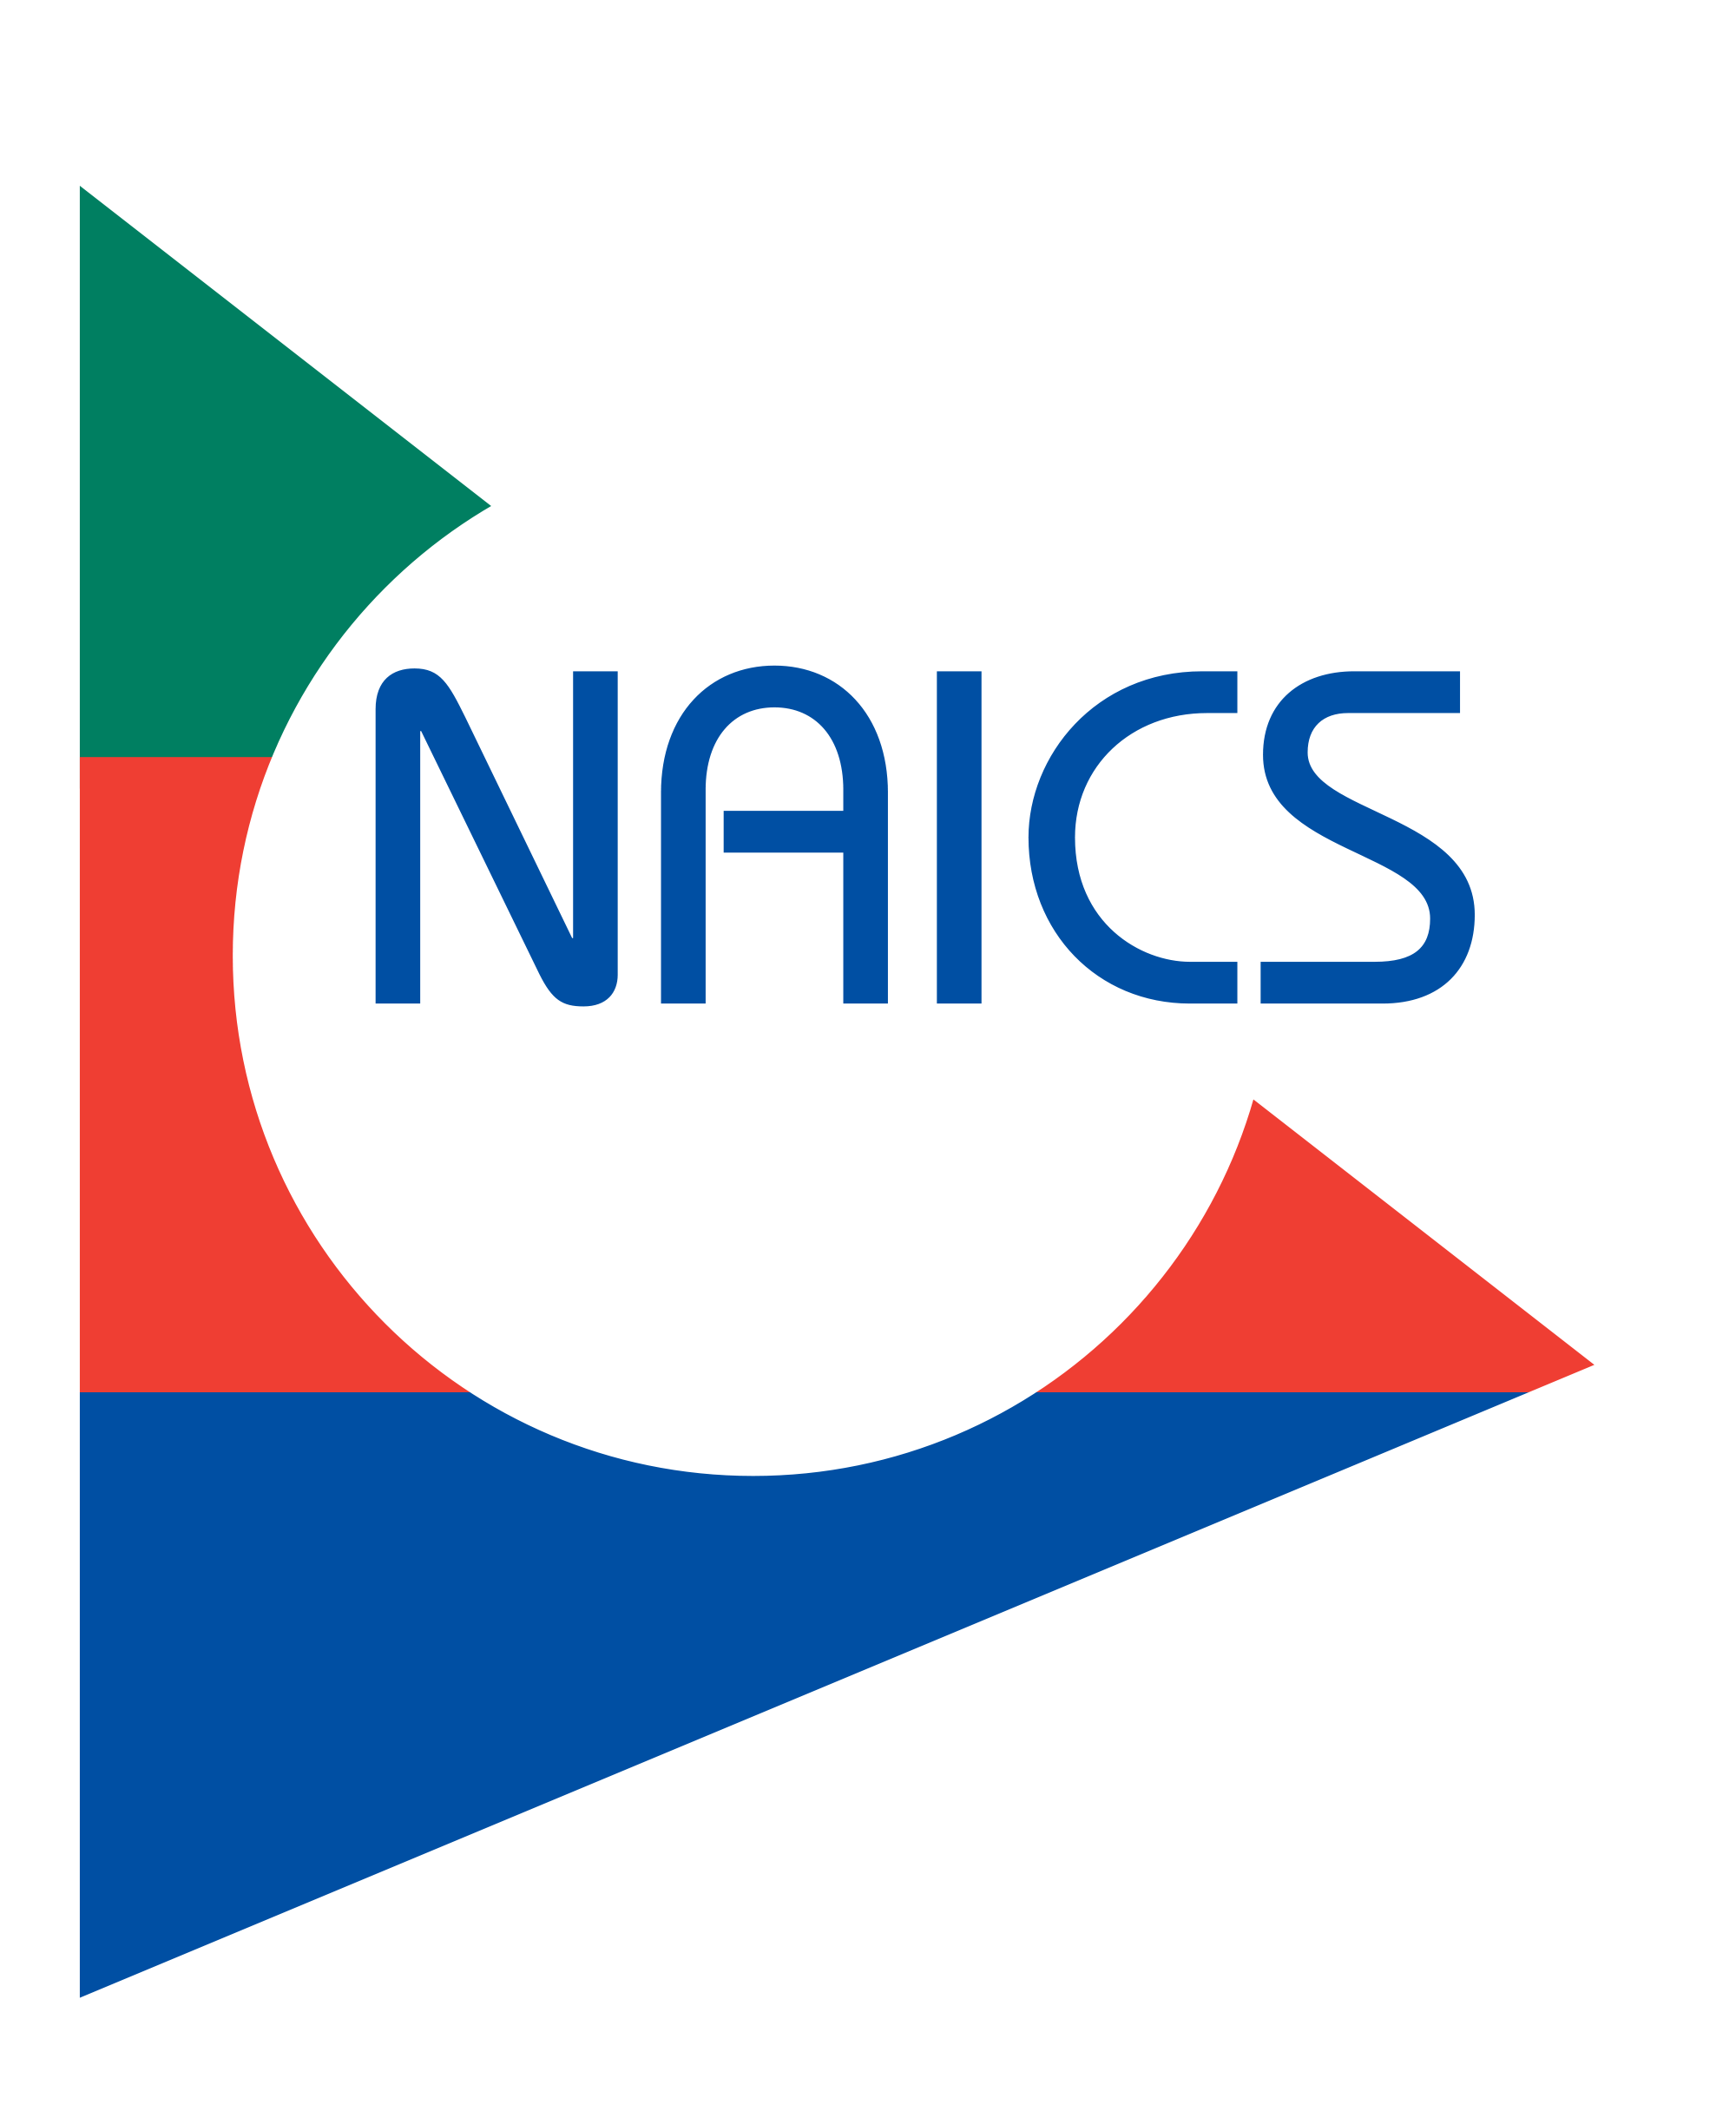 naics code for my business